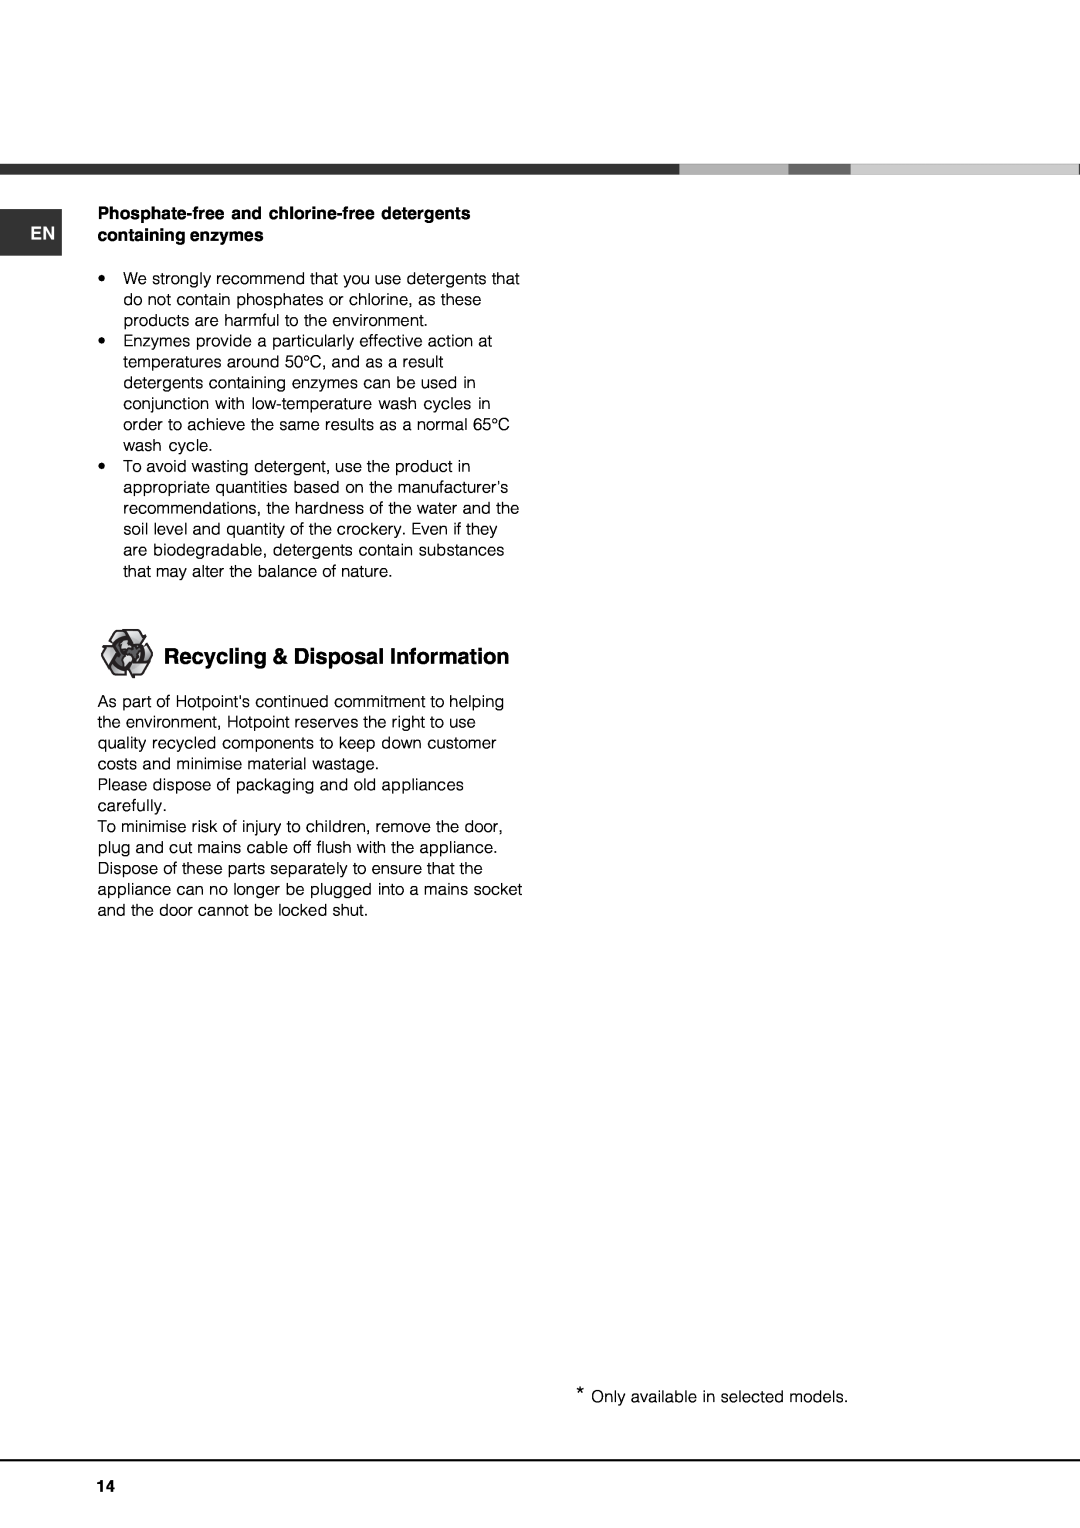 Hotpoint FDF 784 manual Recycling & Disposal Information, Phosphate-freeand chlorine-freedetergents, EN containing enzymes 